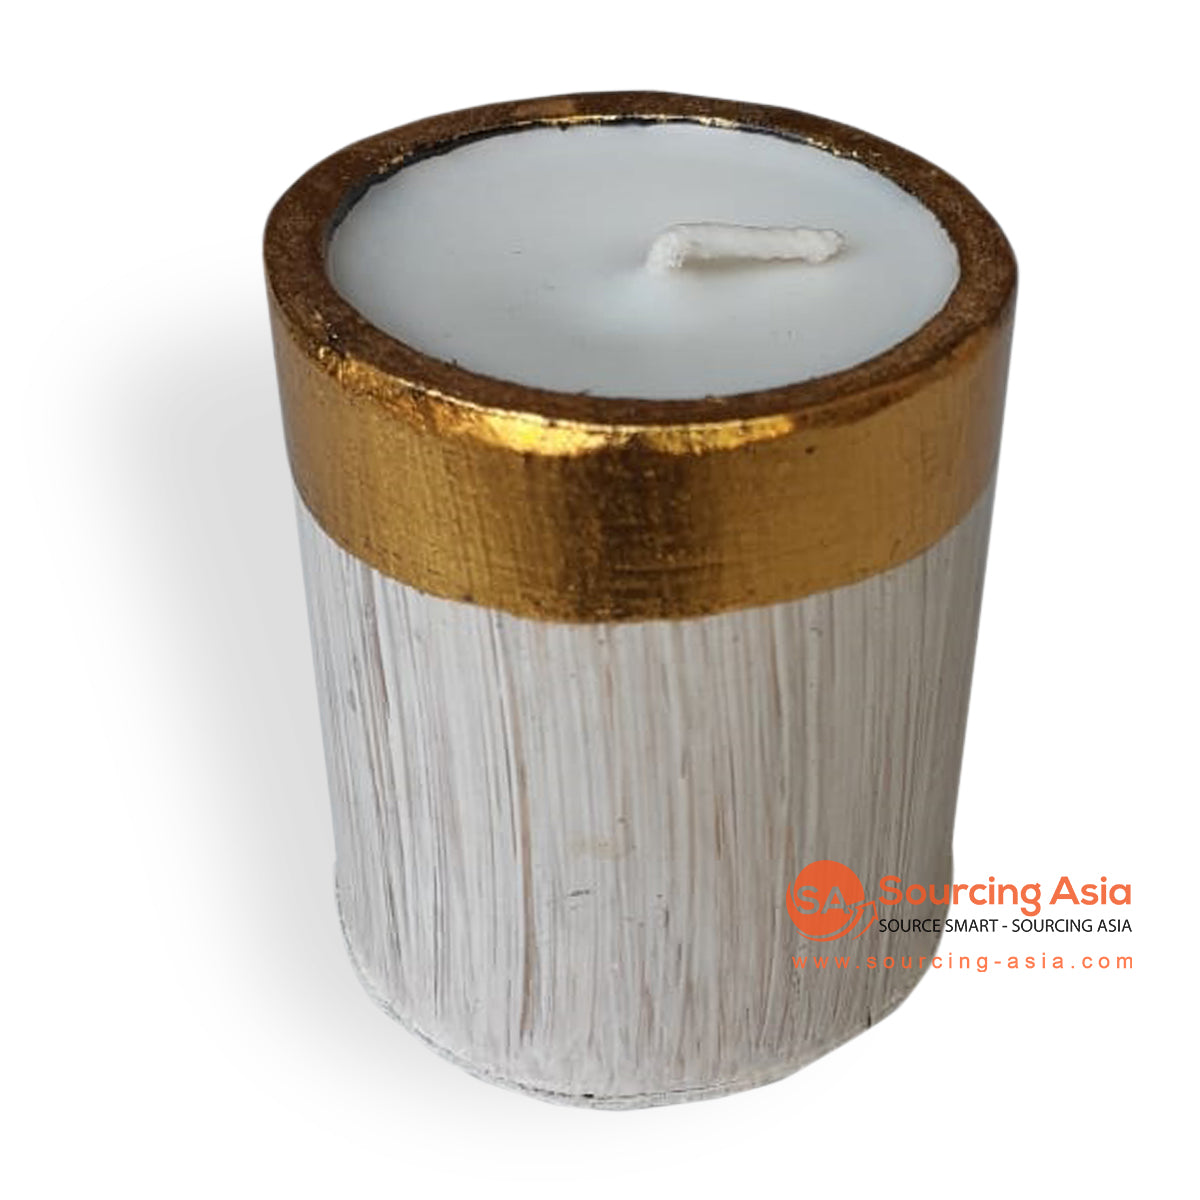 BSC017-1 WHITE WASH BAMBOO WOOD CANDLE WITH GOLDEN EDGE